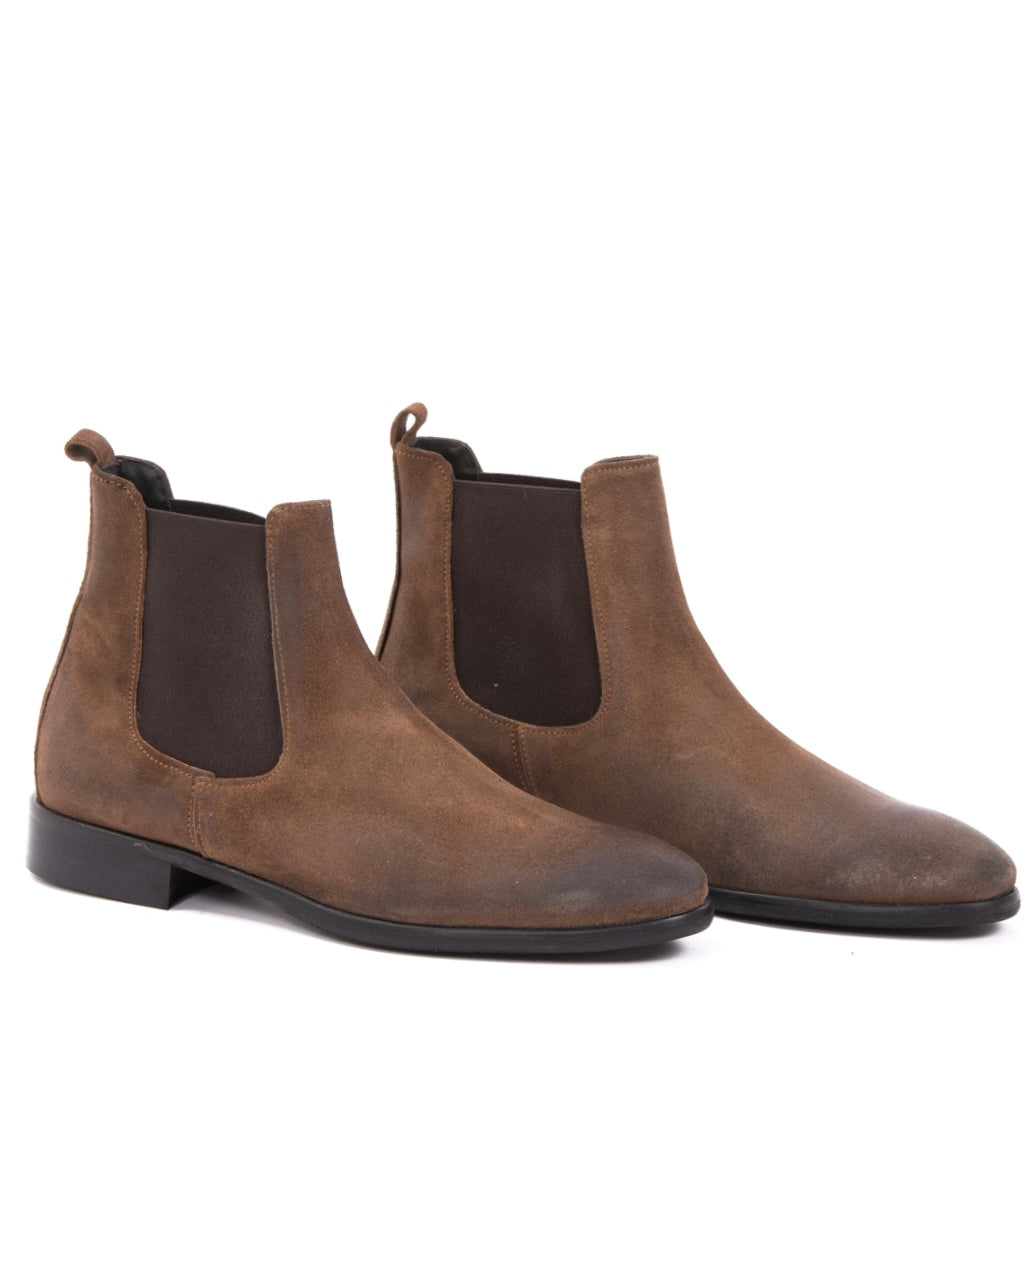 Dre - steppe dirty suede chelsea boots